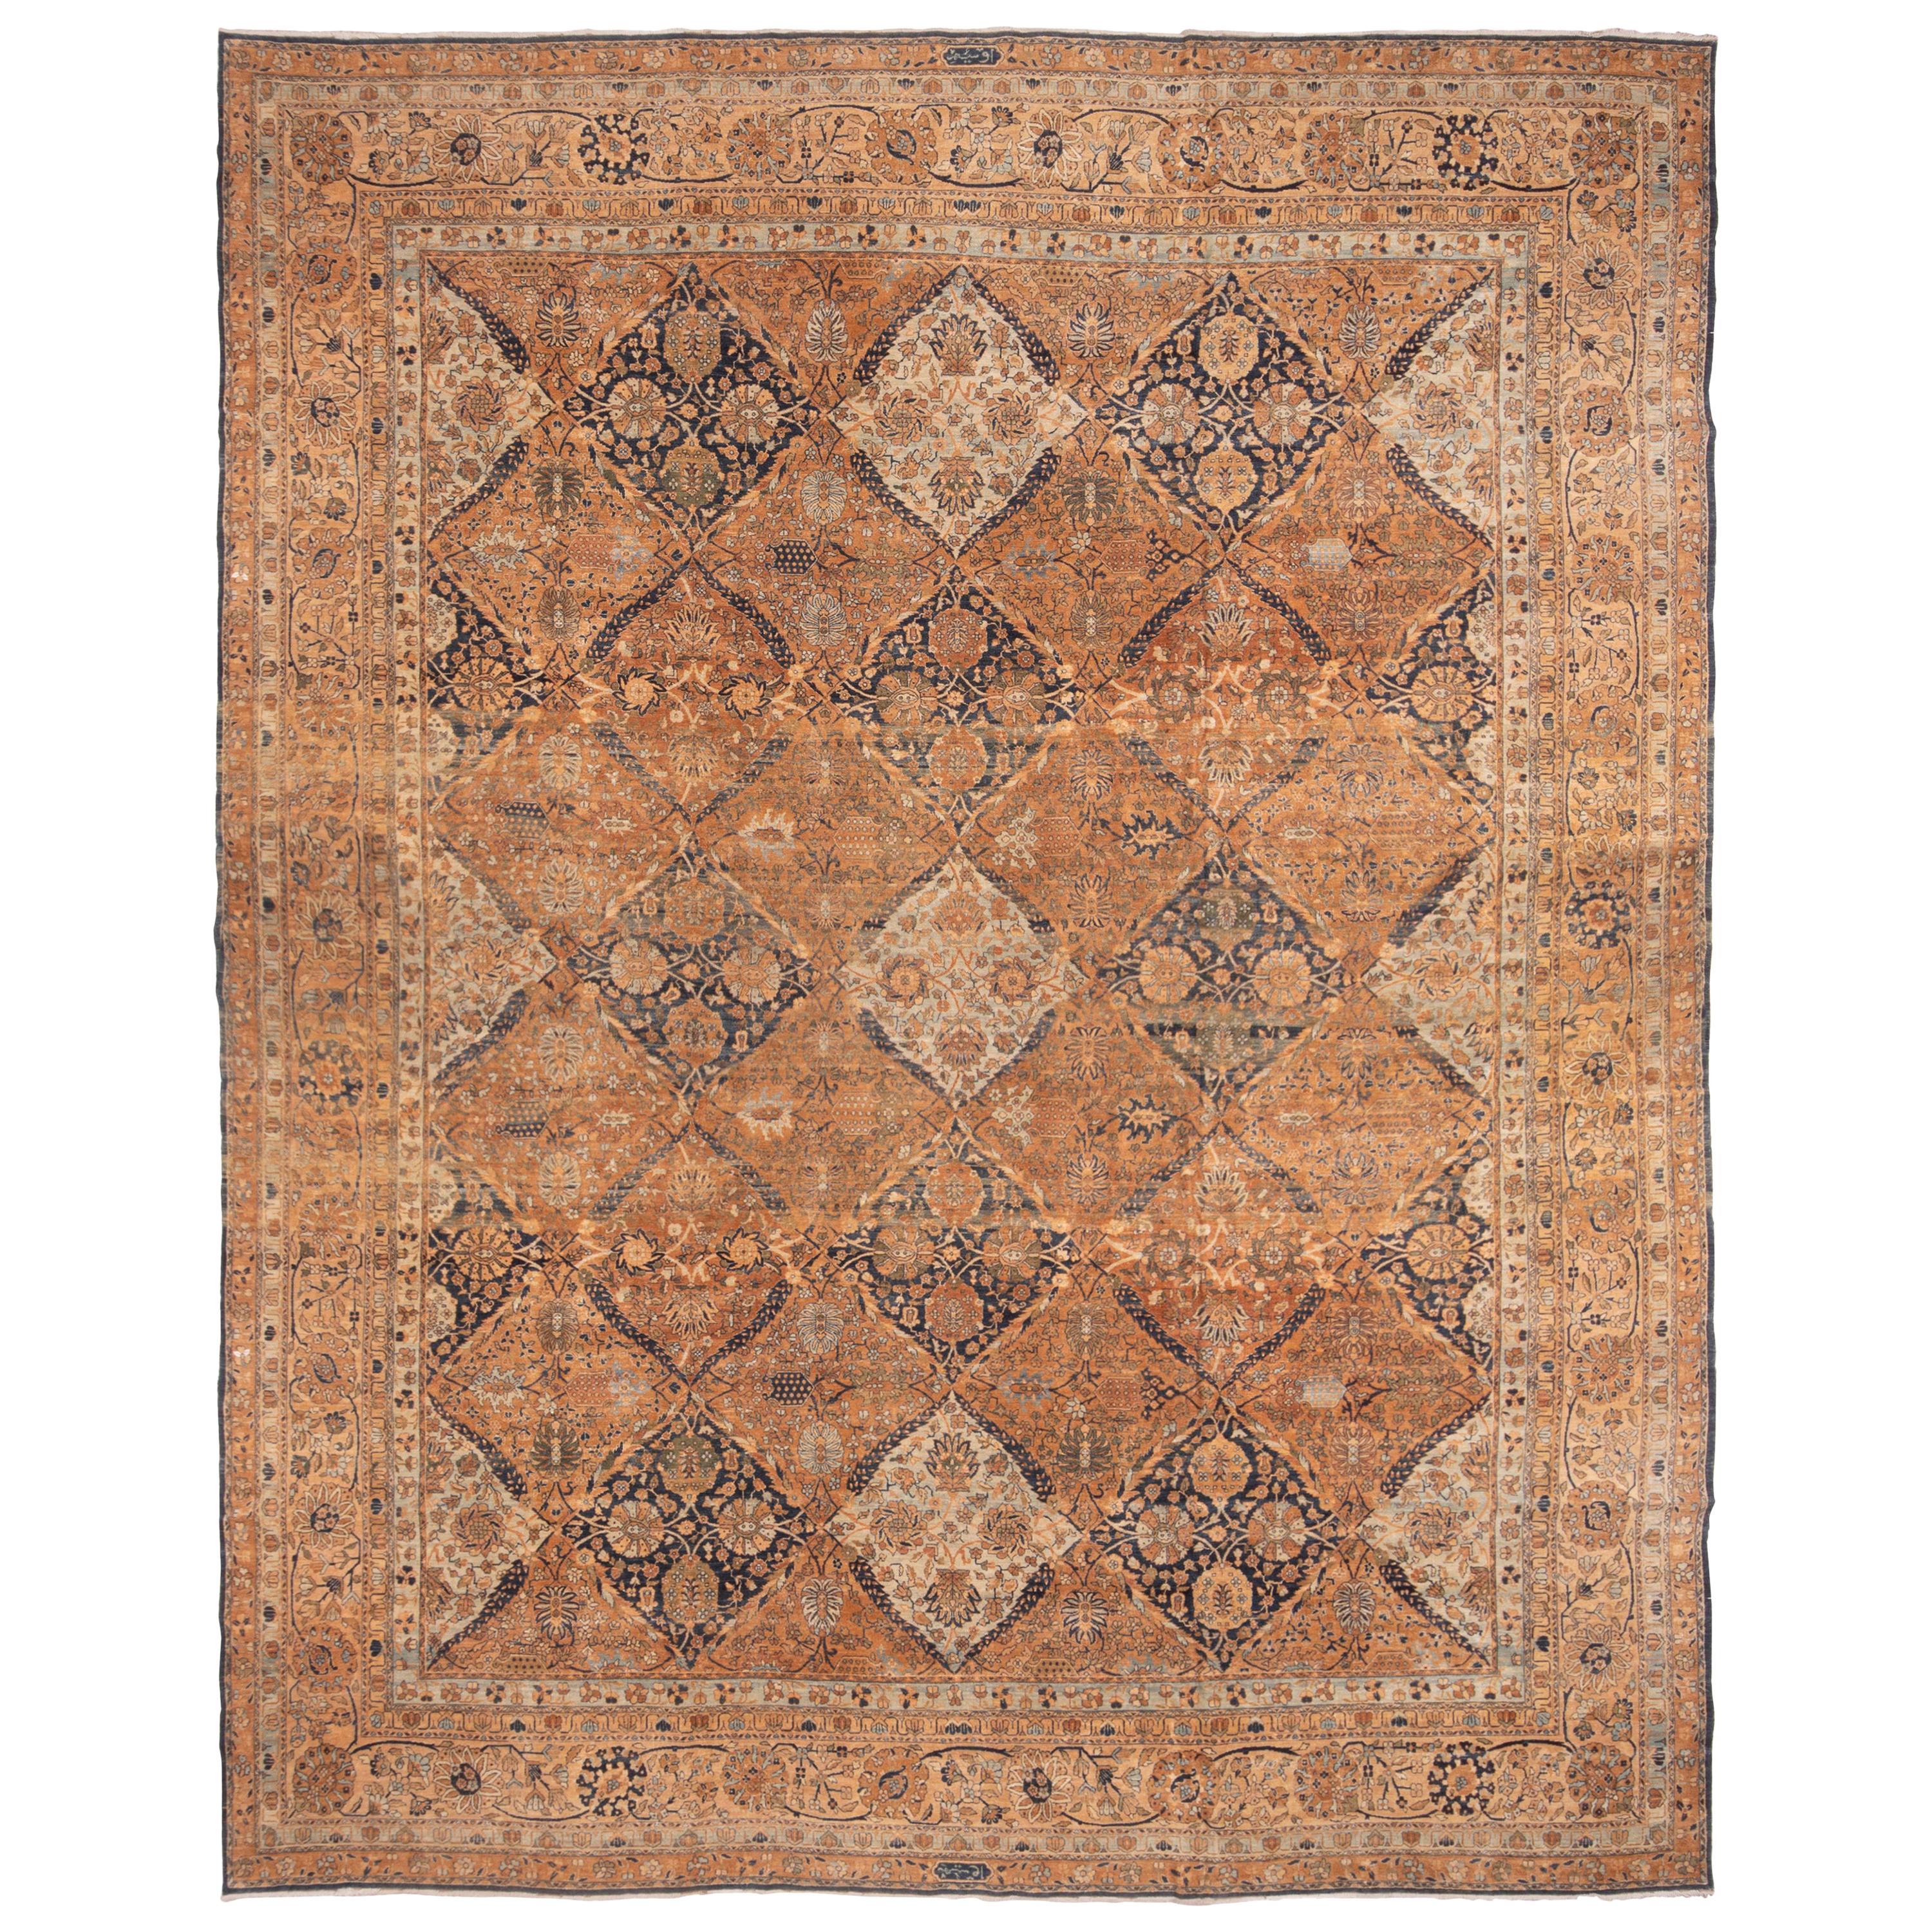 Antique Yazd Brown and Blue Wool Rug with All-Over Floral Patterns